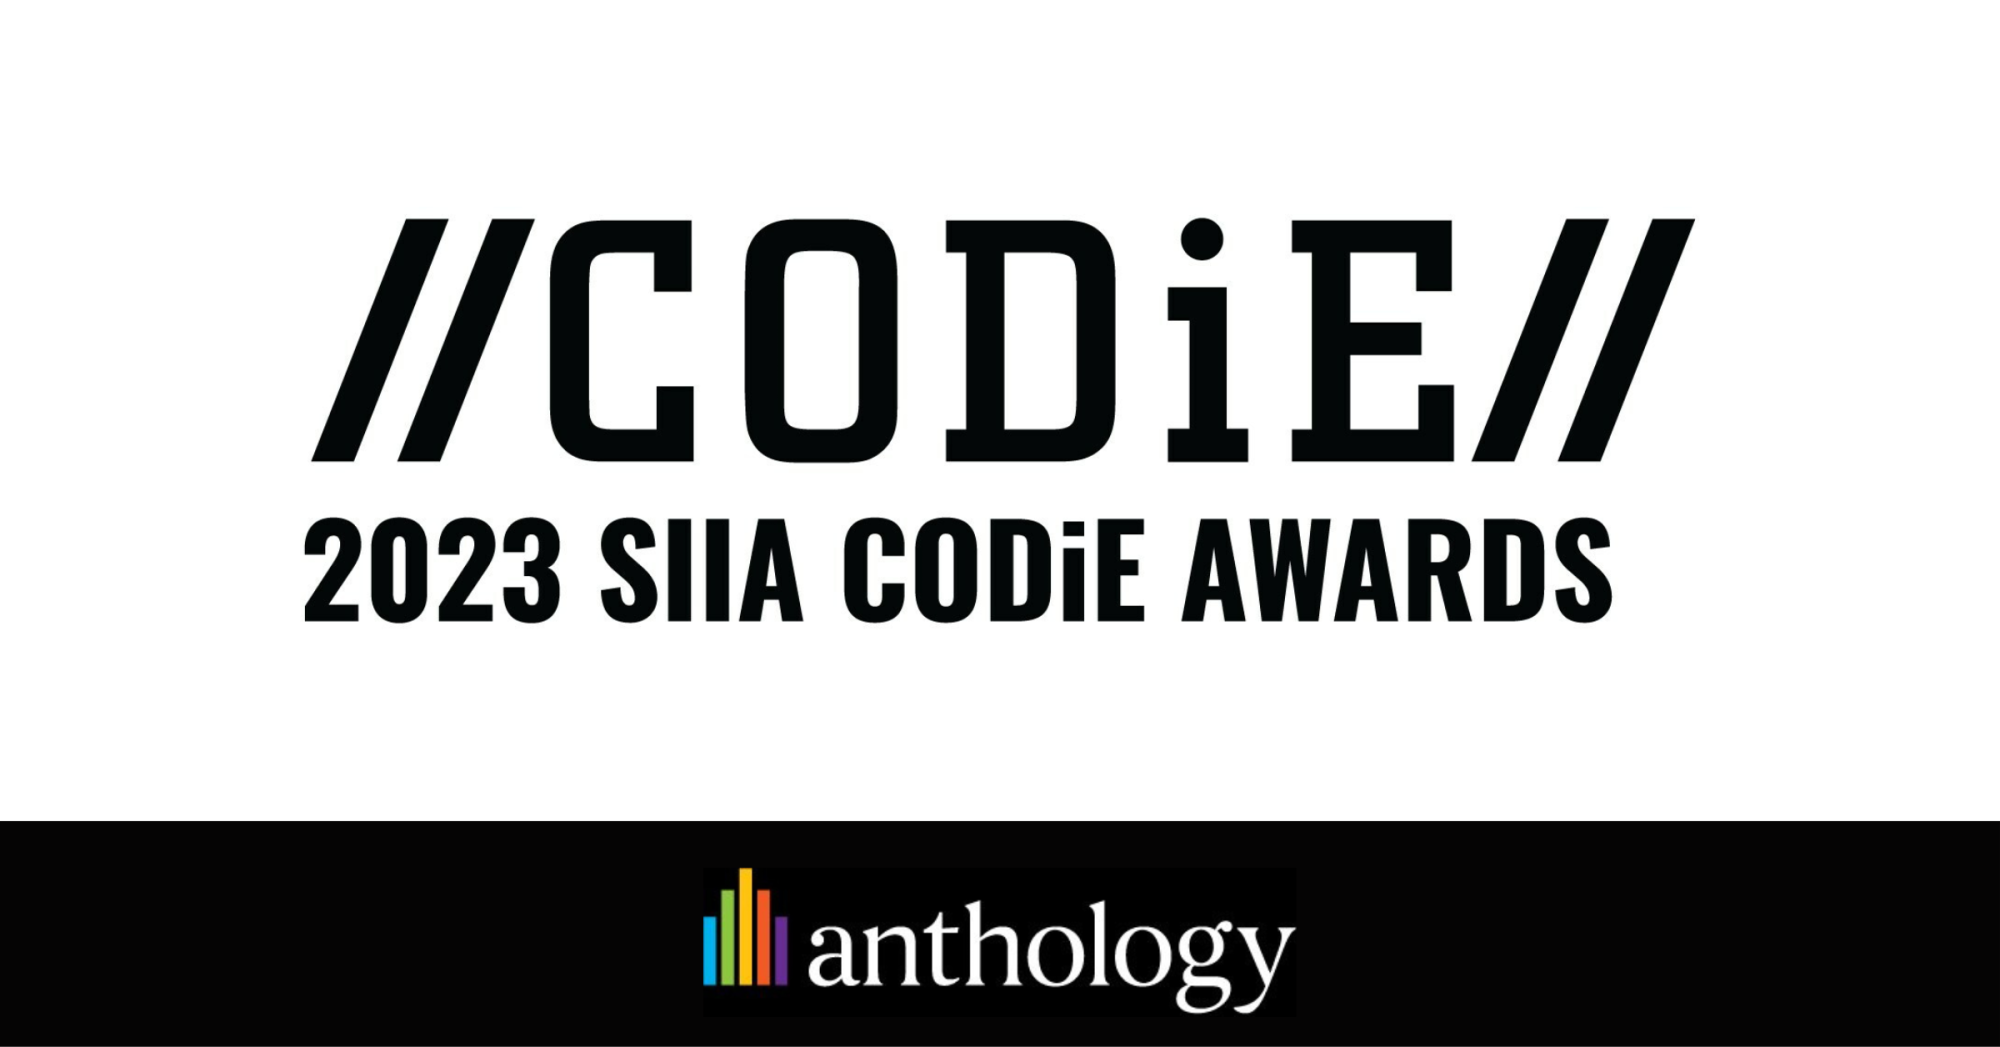 Image with the //CODiE// 2023 SIIA CODiE AWARDS logo in the middle, and below the Anthology logo. 